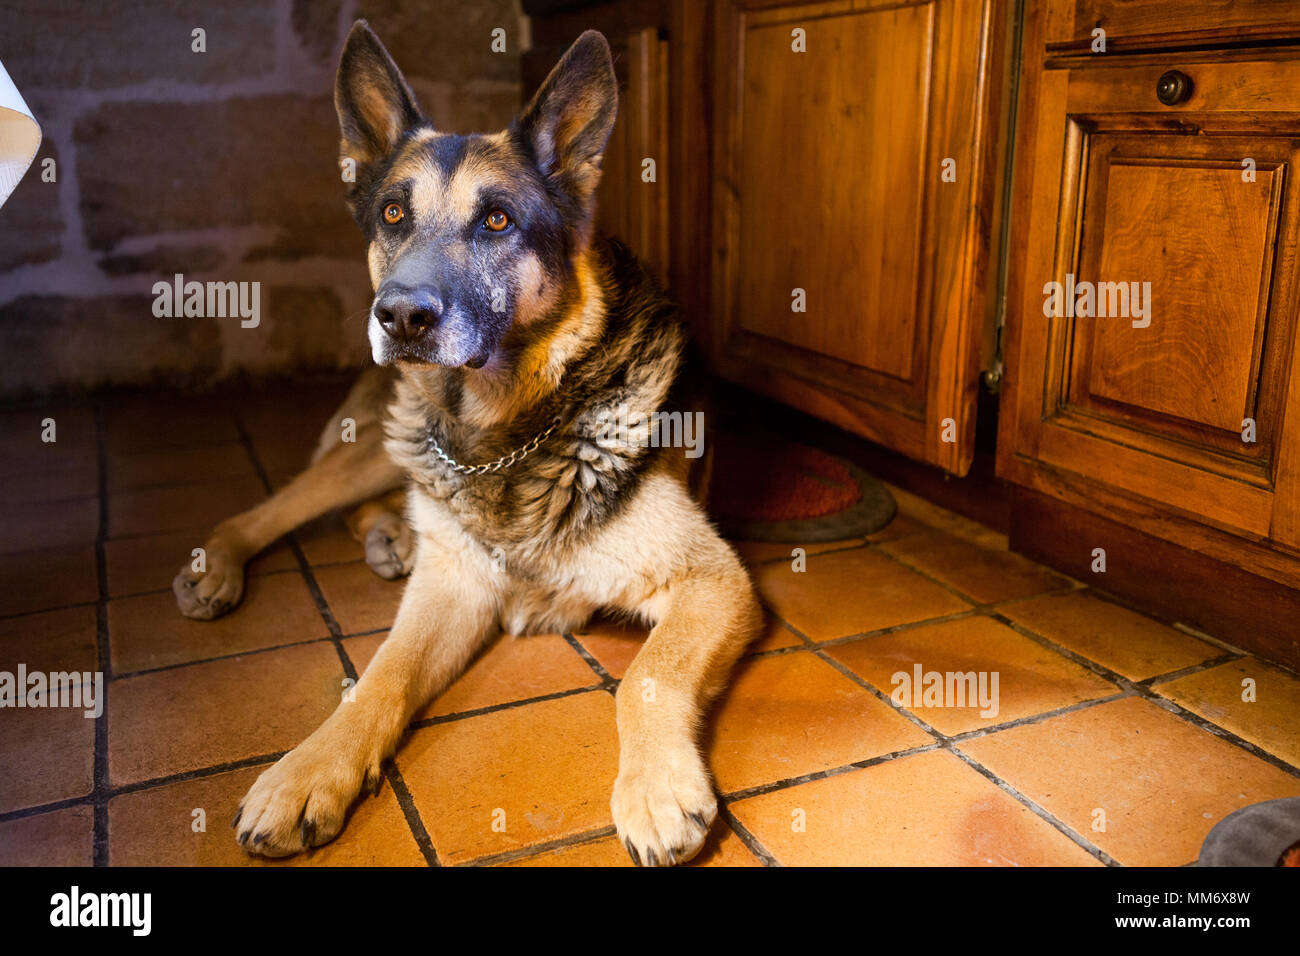 German Shepherd ( Berger Allemand ) lying down on the tile floor of a rural french house with stone walls and wood cupboard Stock Photo